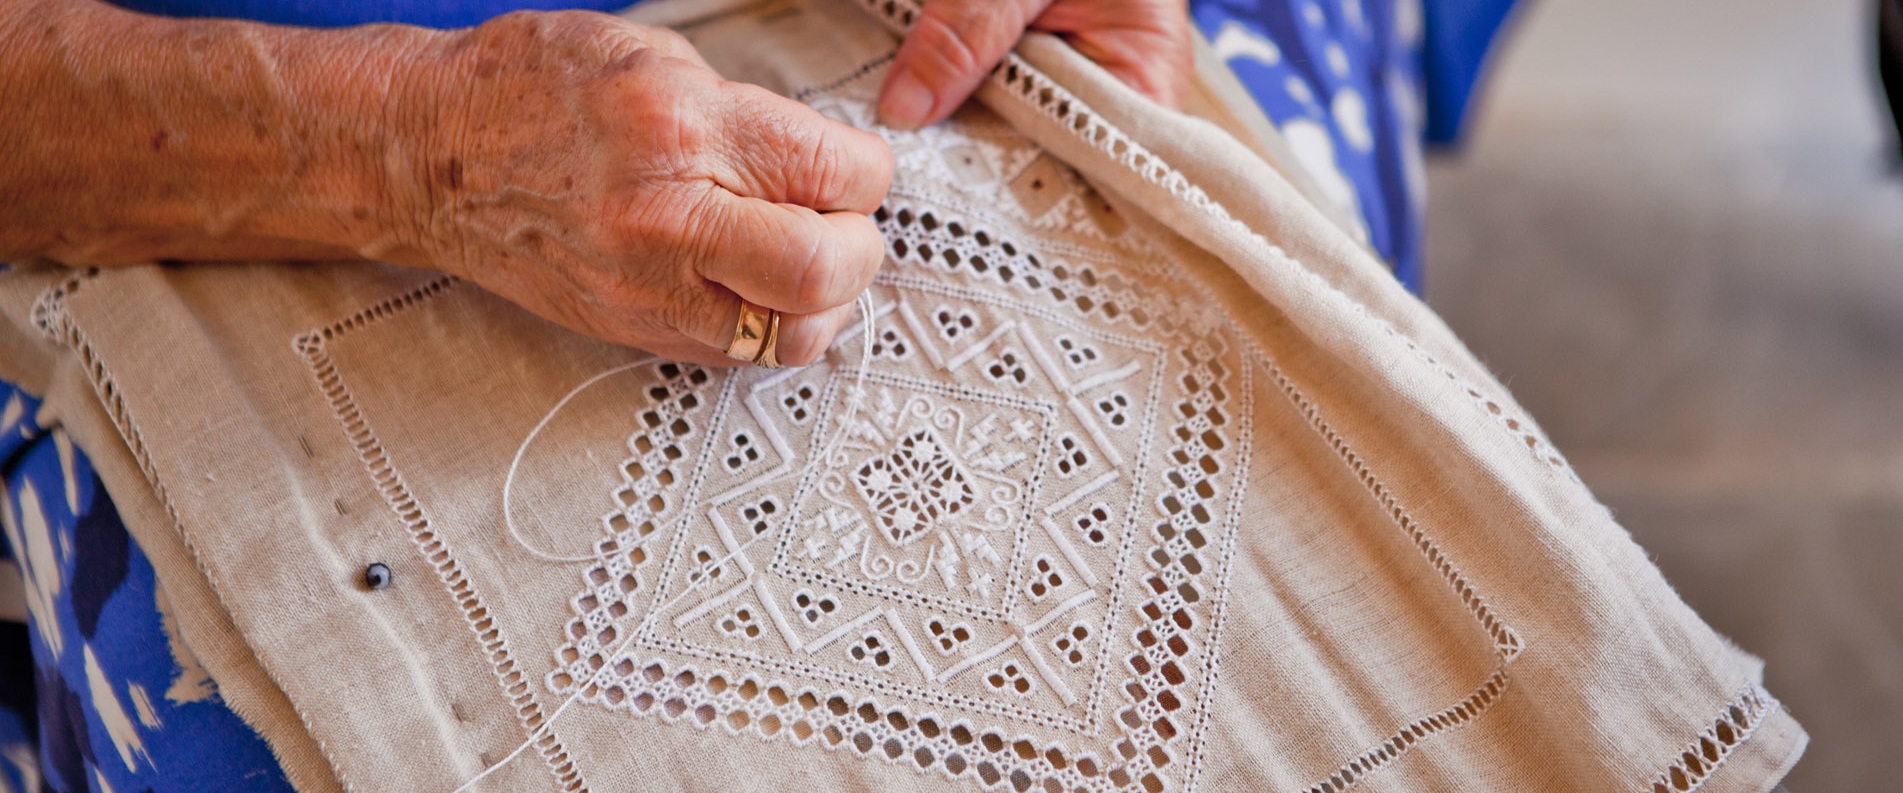 Lacework, Embroidery and Crochet | Cyprus For Travellers